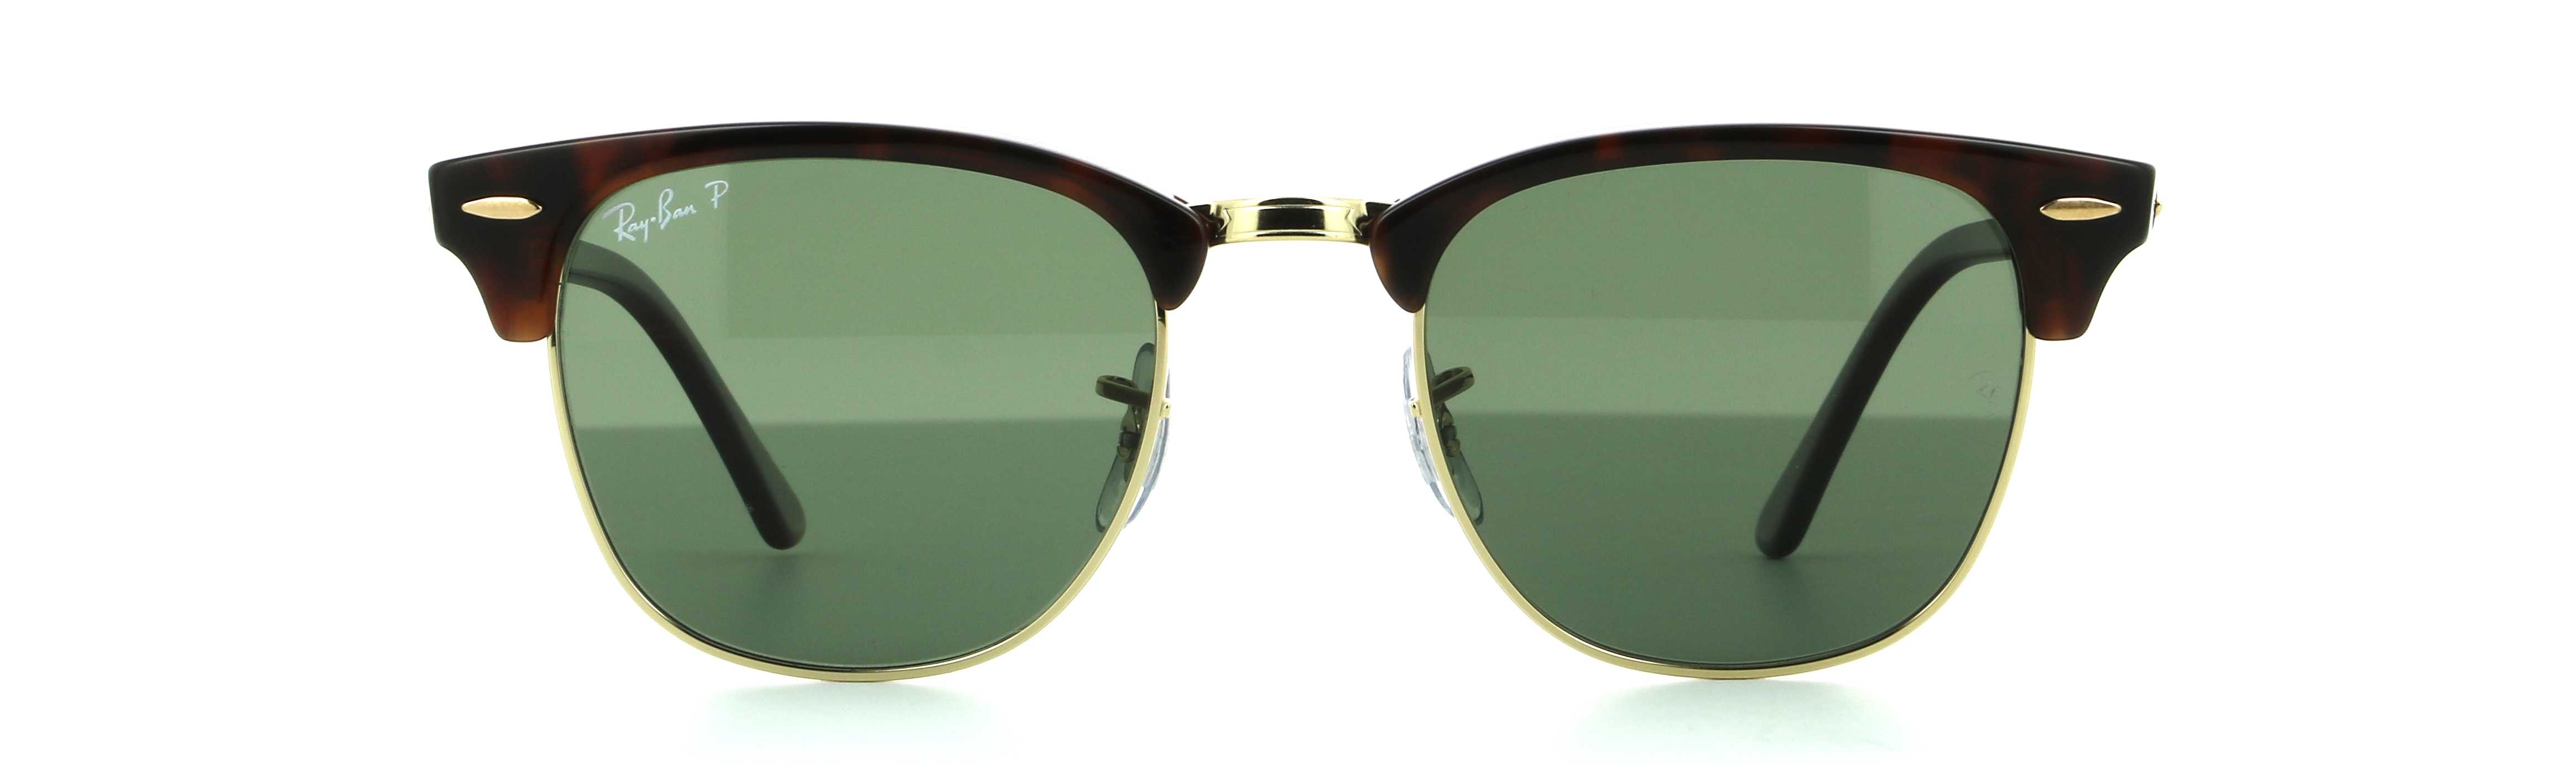 ray ban 3016 clubmaster